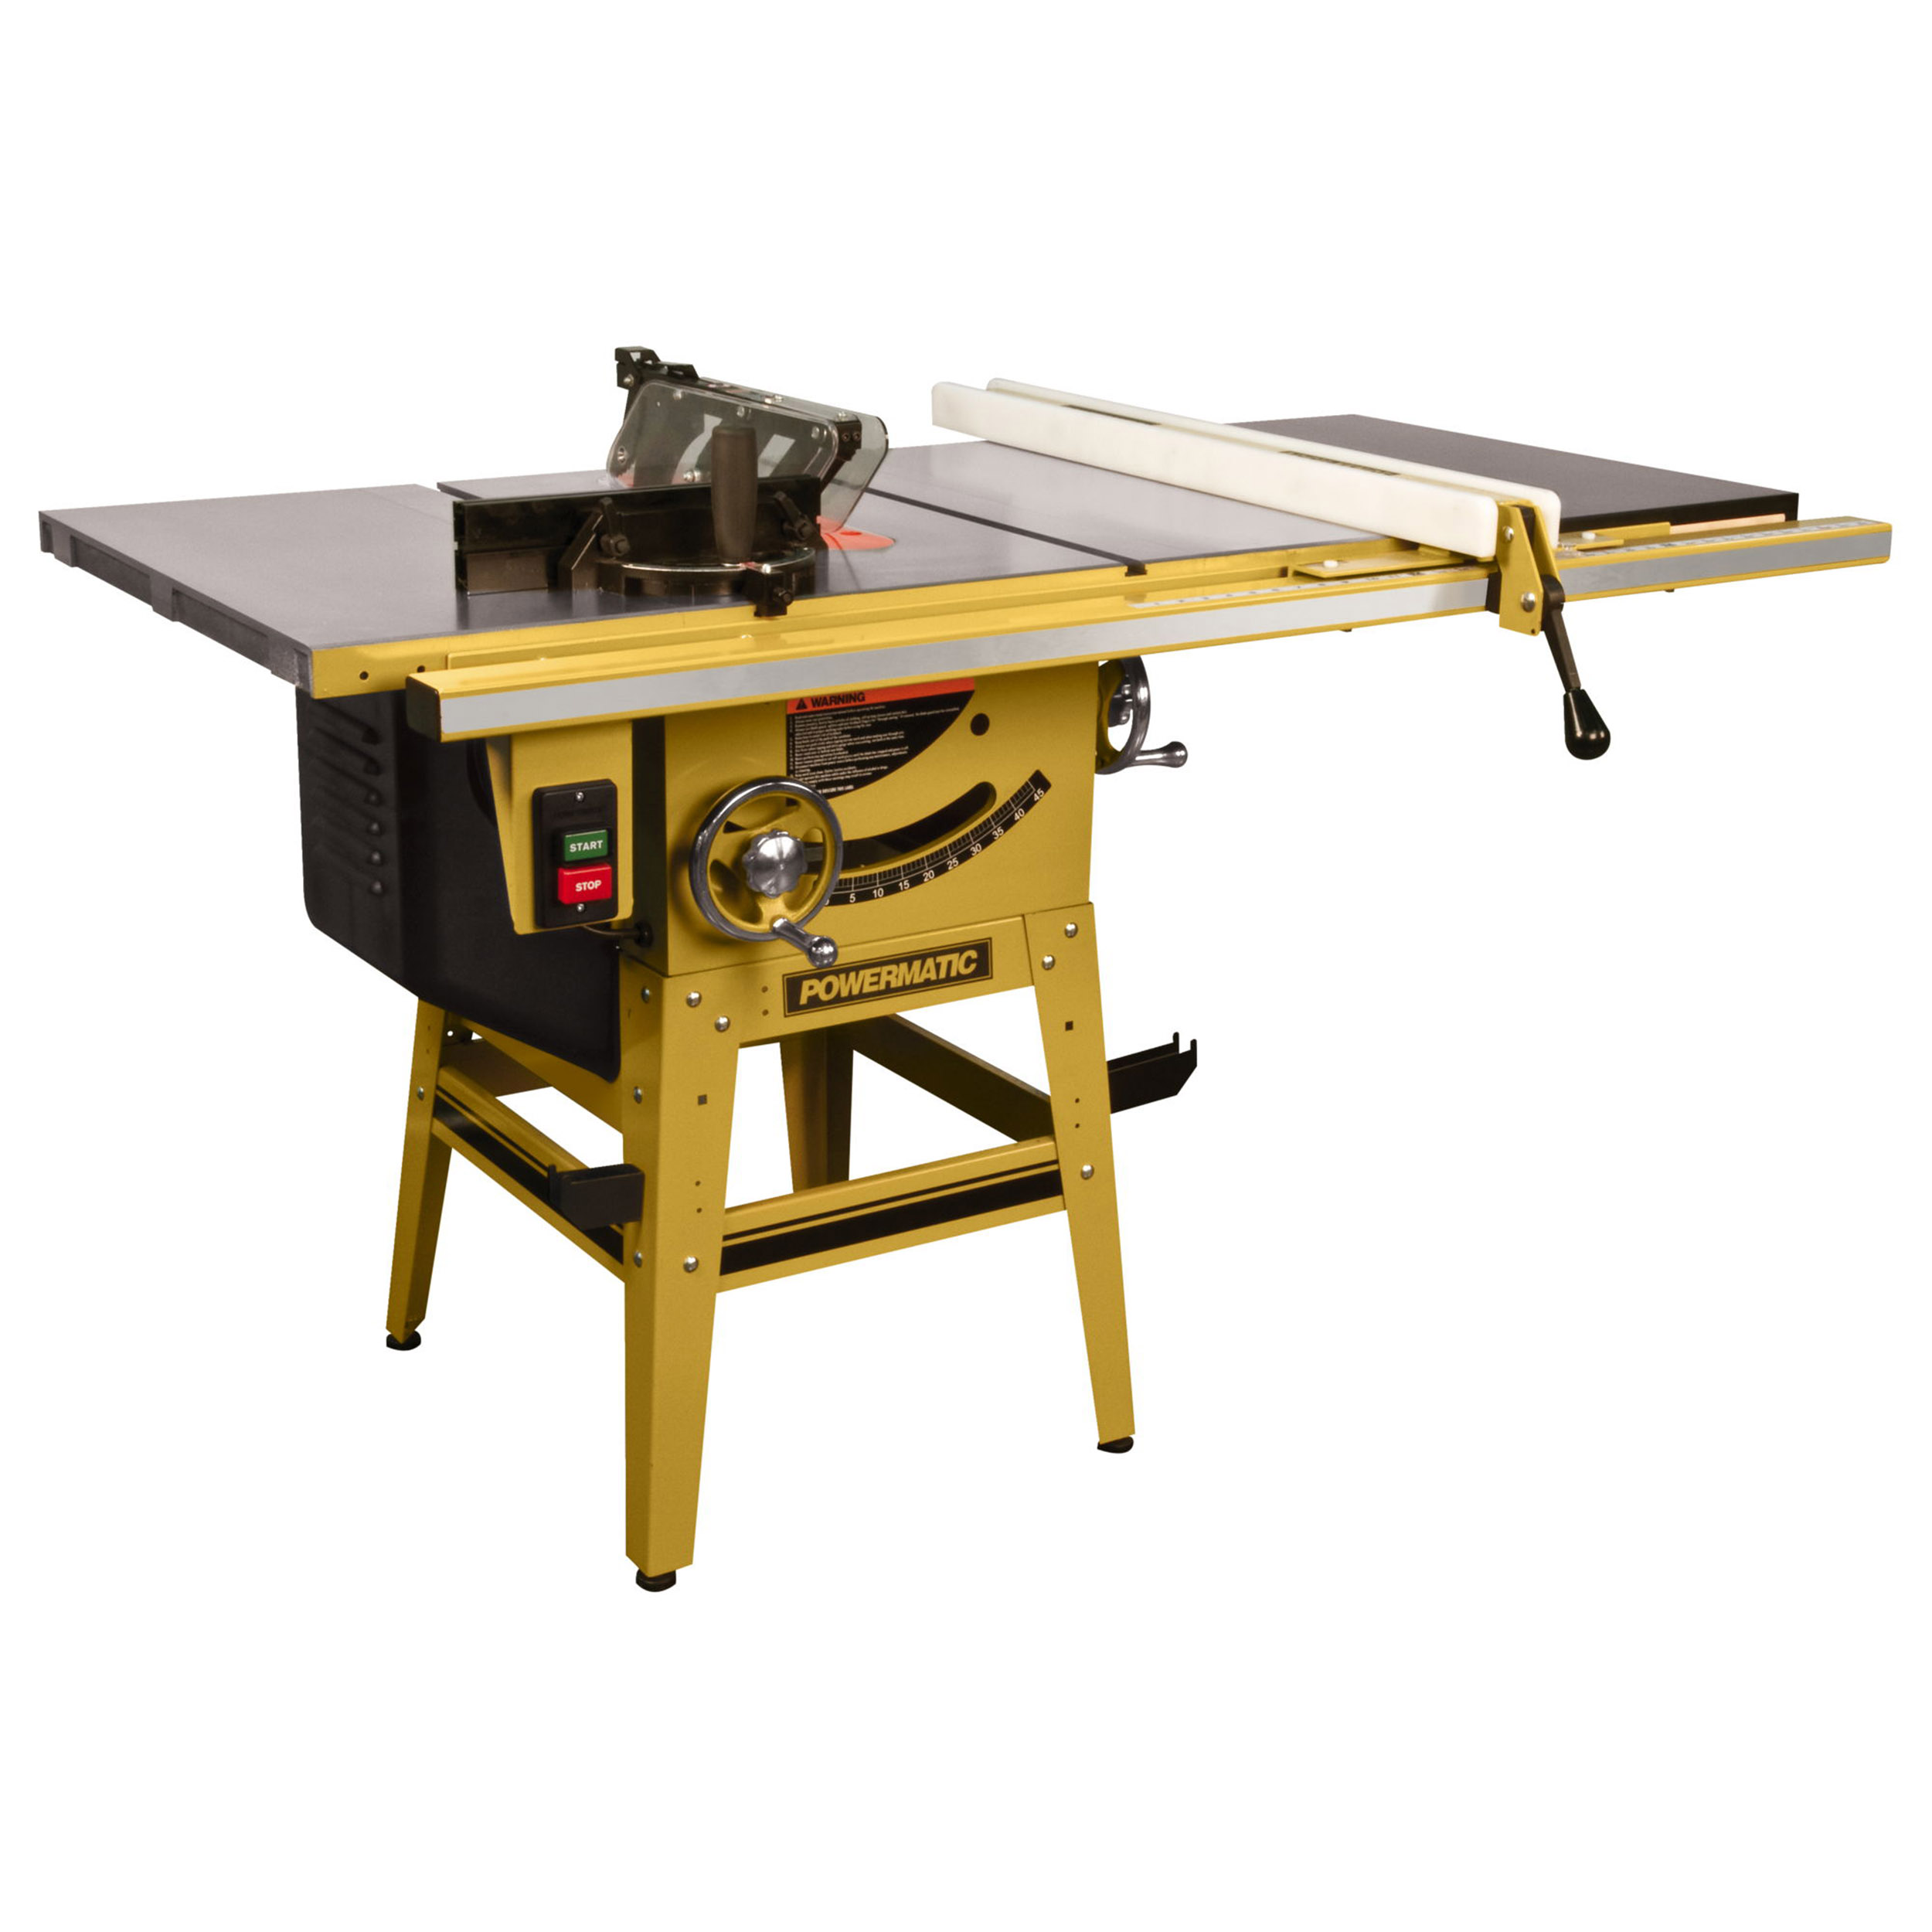 Table Saw, 1-3/4hp, 30" Fence With Riving Knife, Model 64b-30